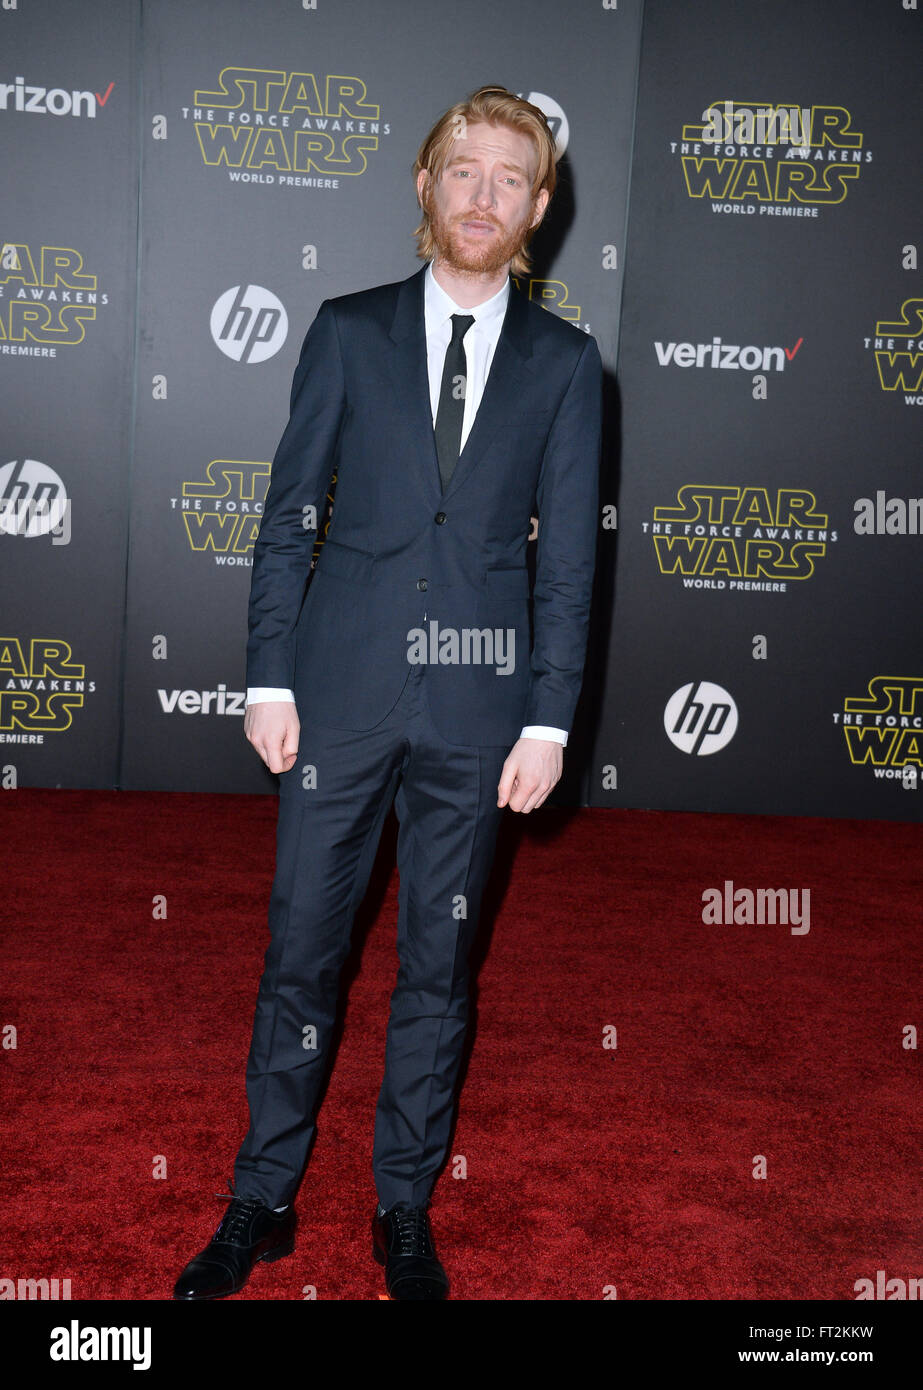 LOS ANGELES, CA - DECEMBER 14, 2015: Actor Domnhall Gleeson at the world premiere of 'Star Wars: The Force Awakens' on Hollywood Boulevard Stock Photo